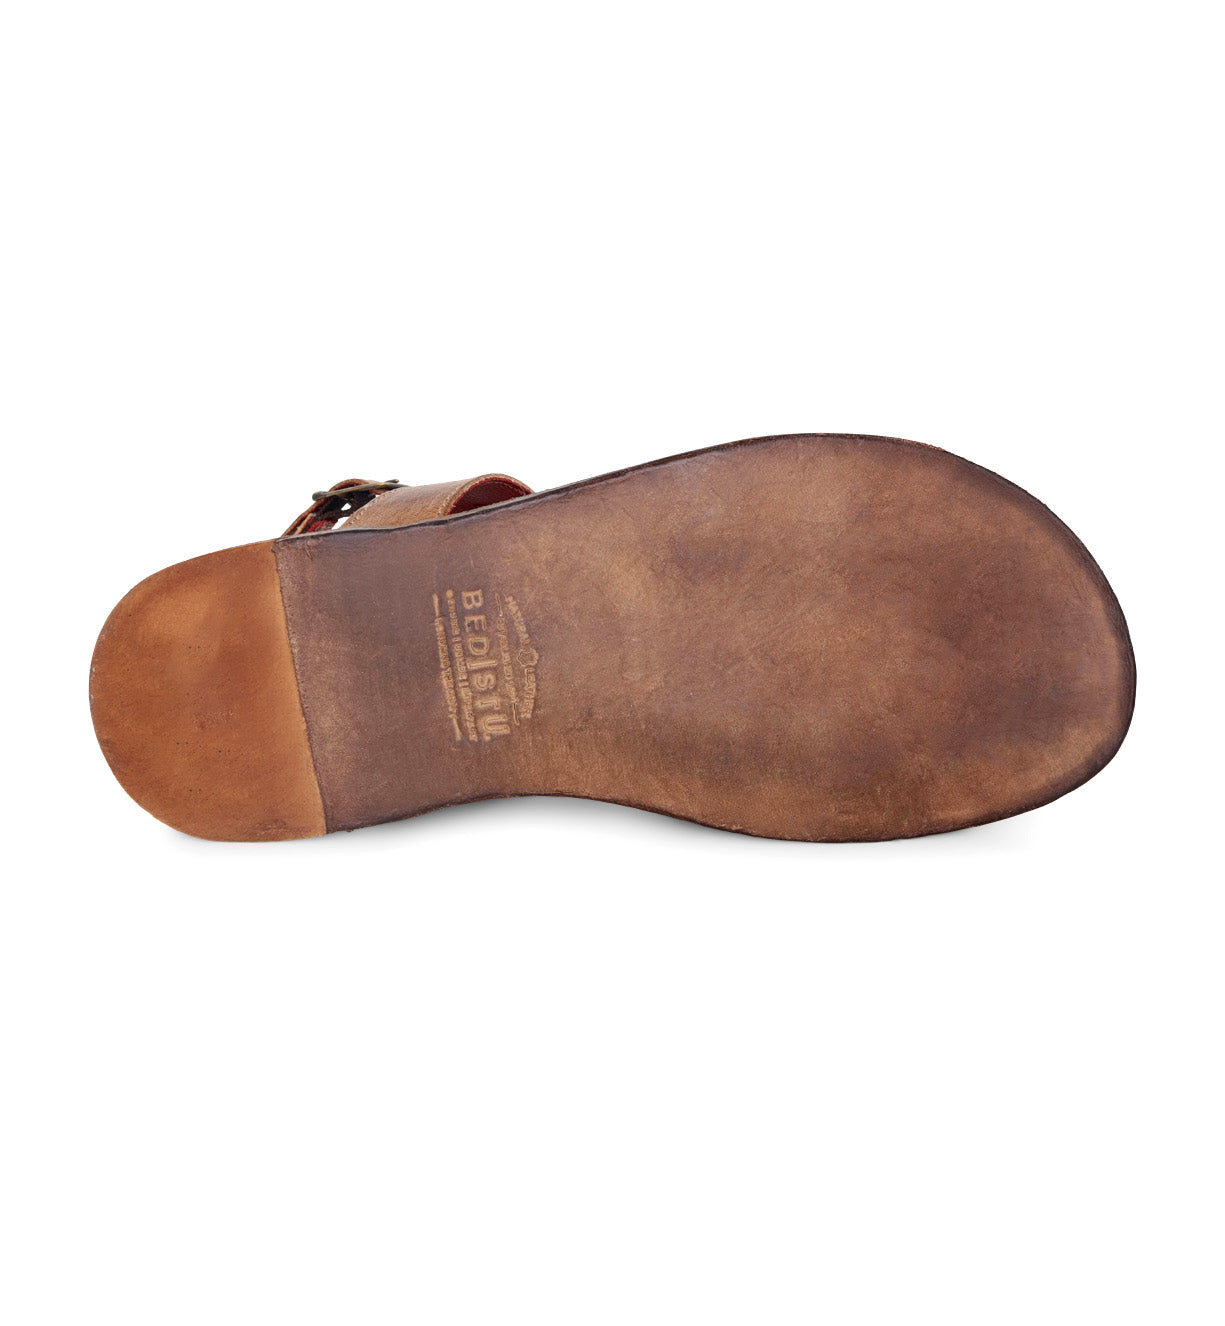 A pair of Bed Stu Manati II brown sandals with a leather sole.